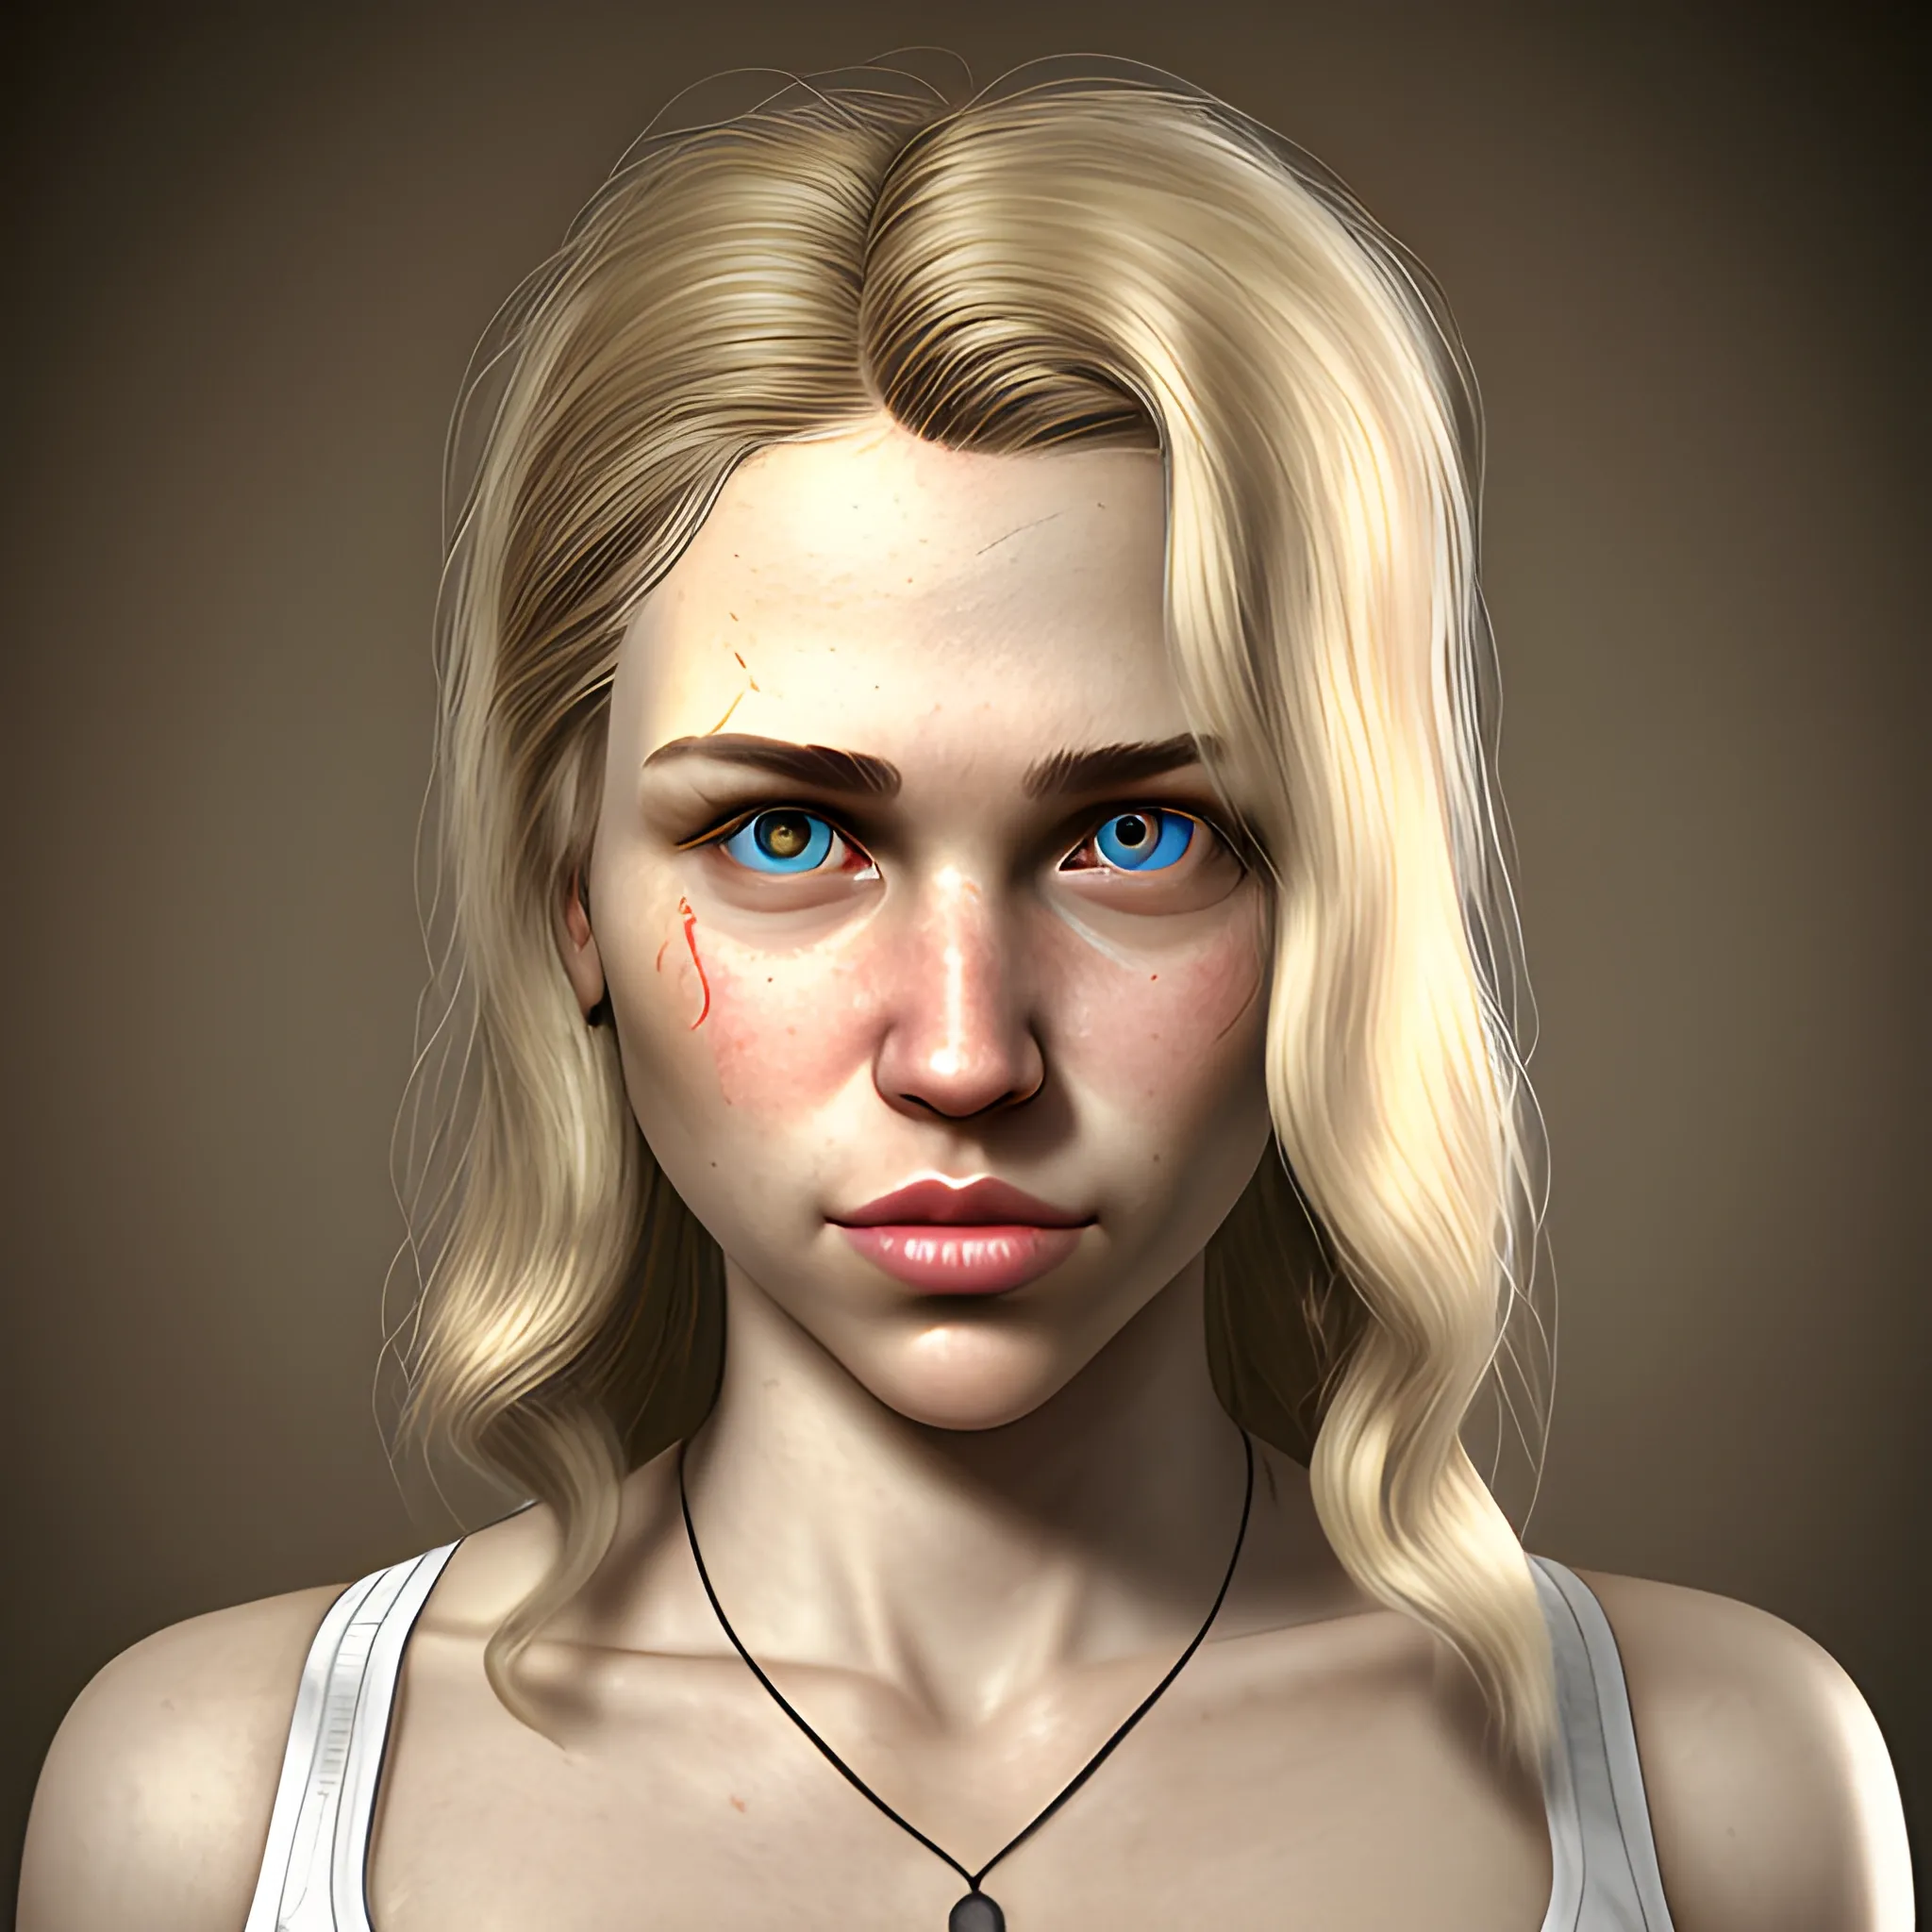 In the style of fallout 1, (masterpiece), (portrait photography), (portrait of a Caucasian female), no makeup, flat chested, white sports bra, dogtags, long hair, blond hair, brown eyes, full lips, round face, round nose, plump cheeks